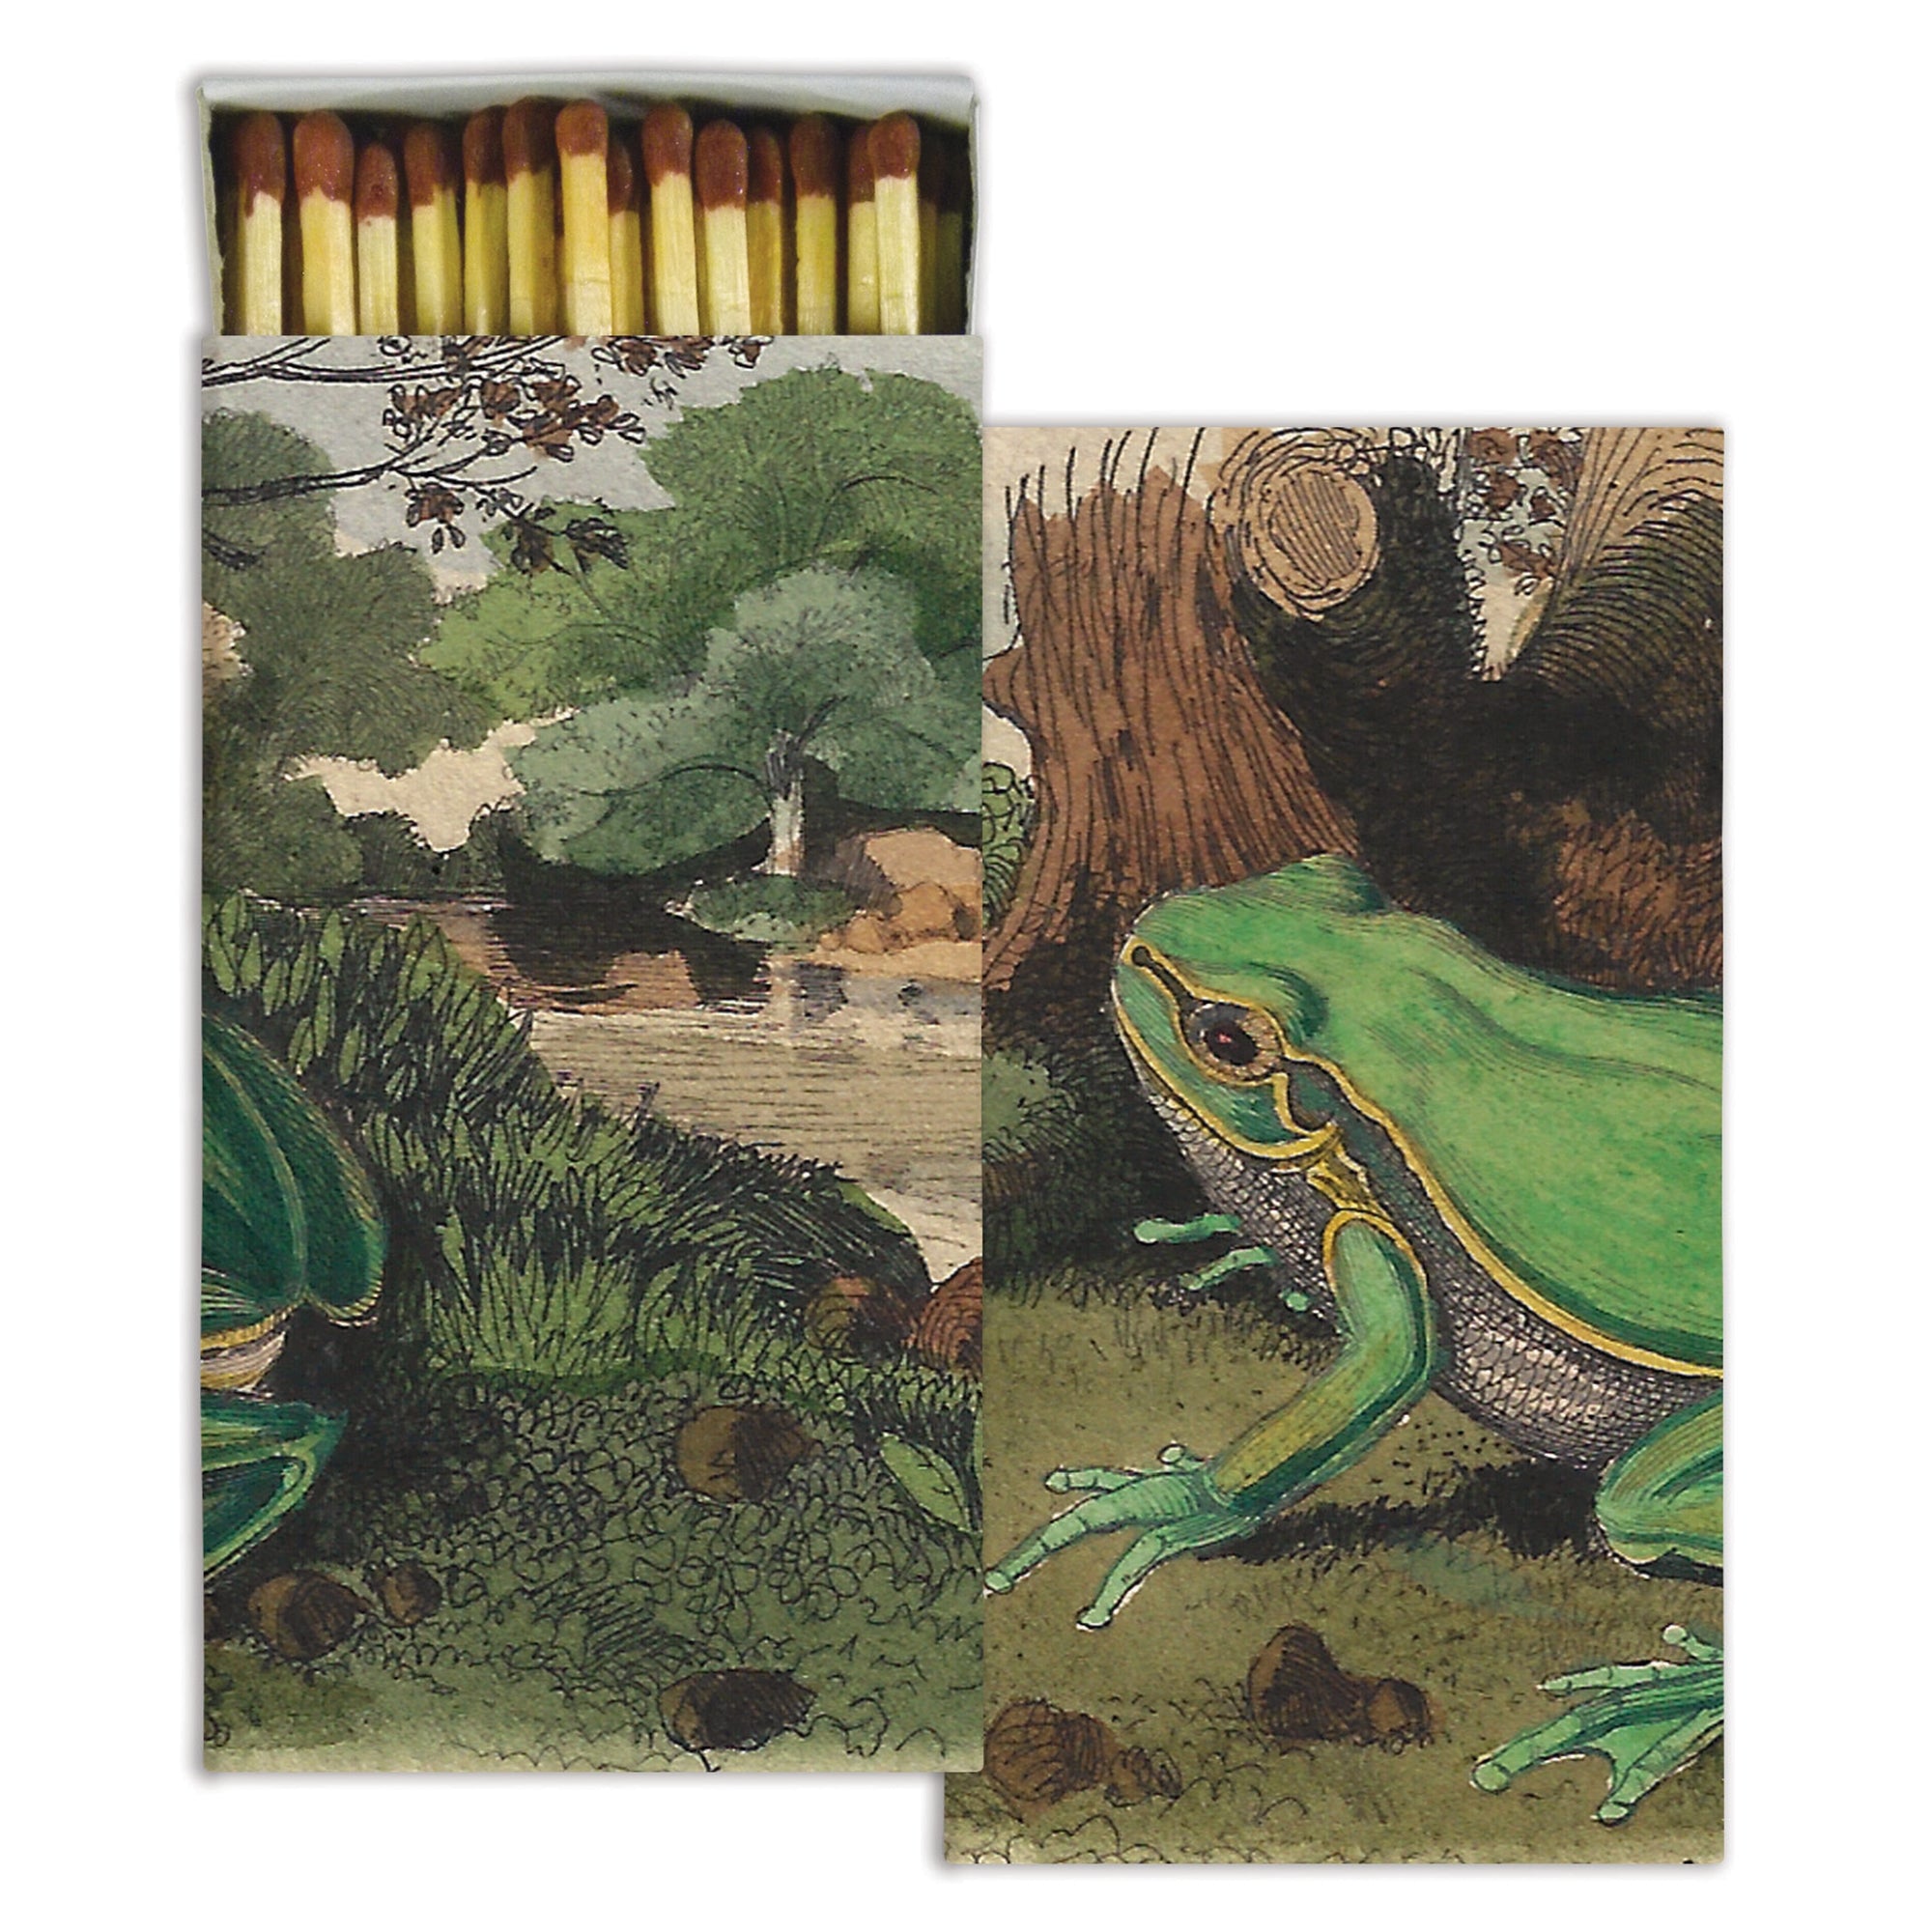 Matches - Landscape with Frog